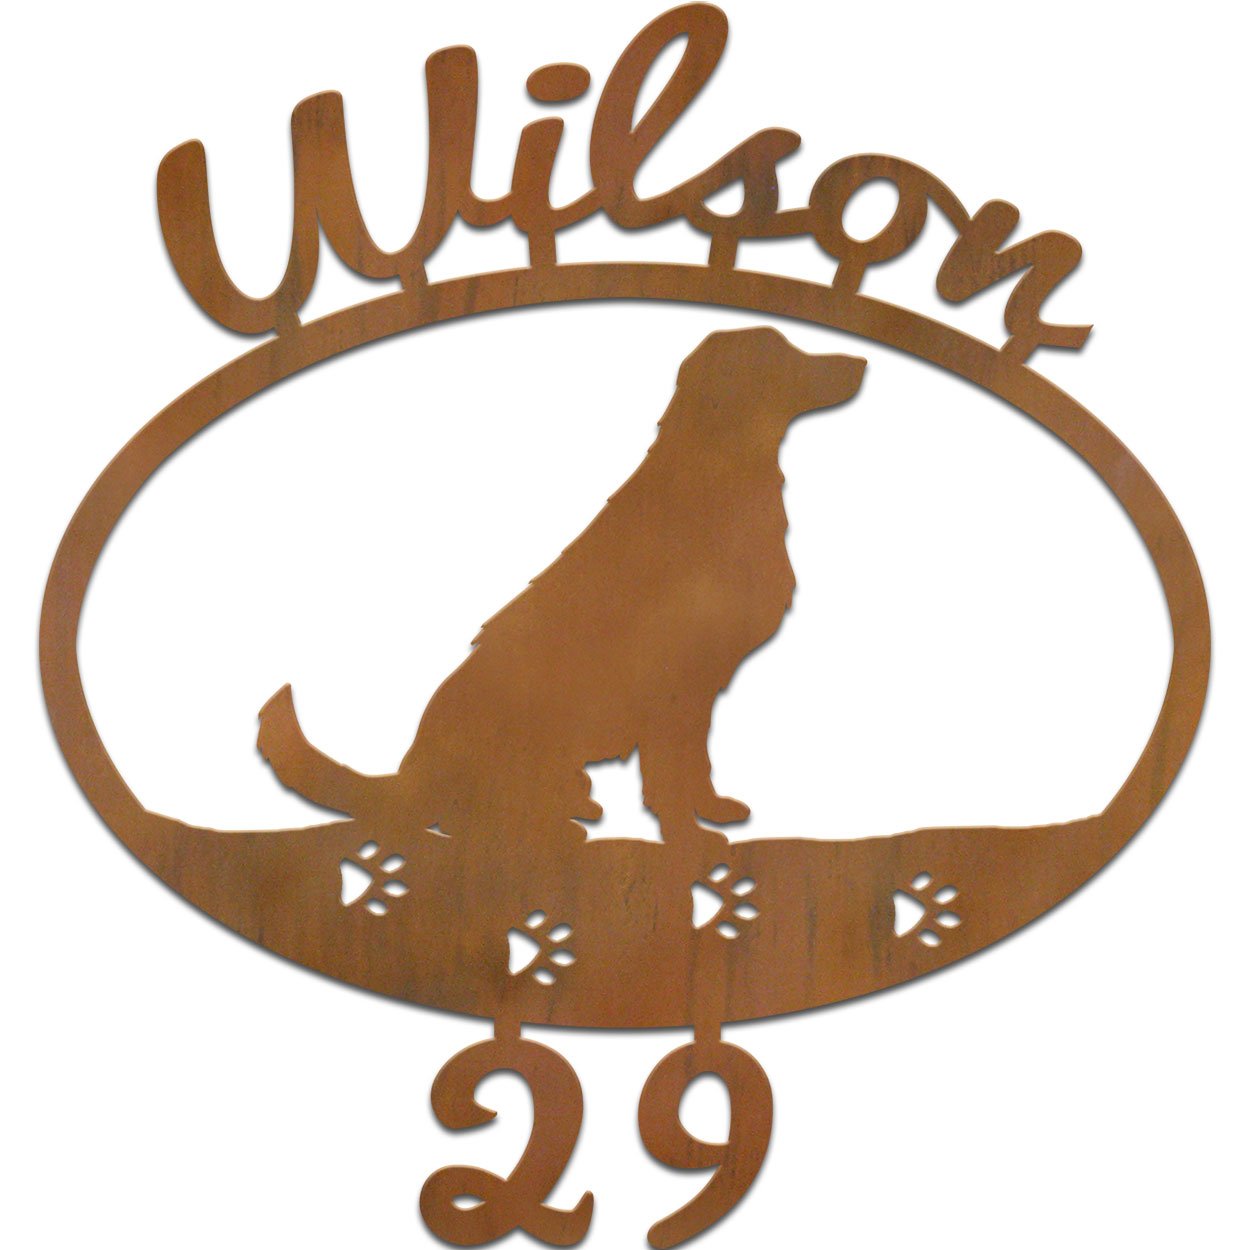 600810 - Golden Retriever Custom Name and House Numbers